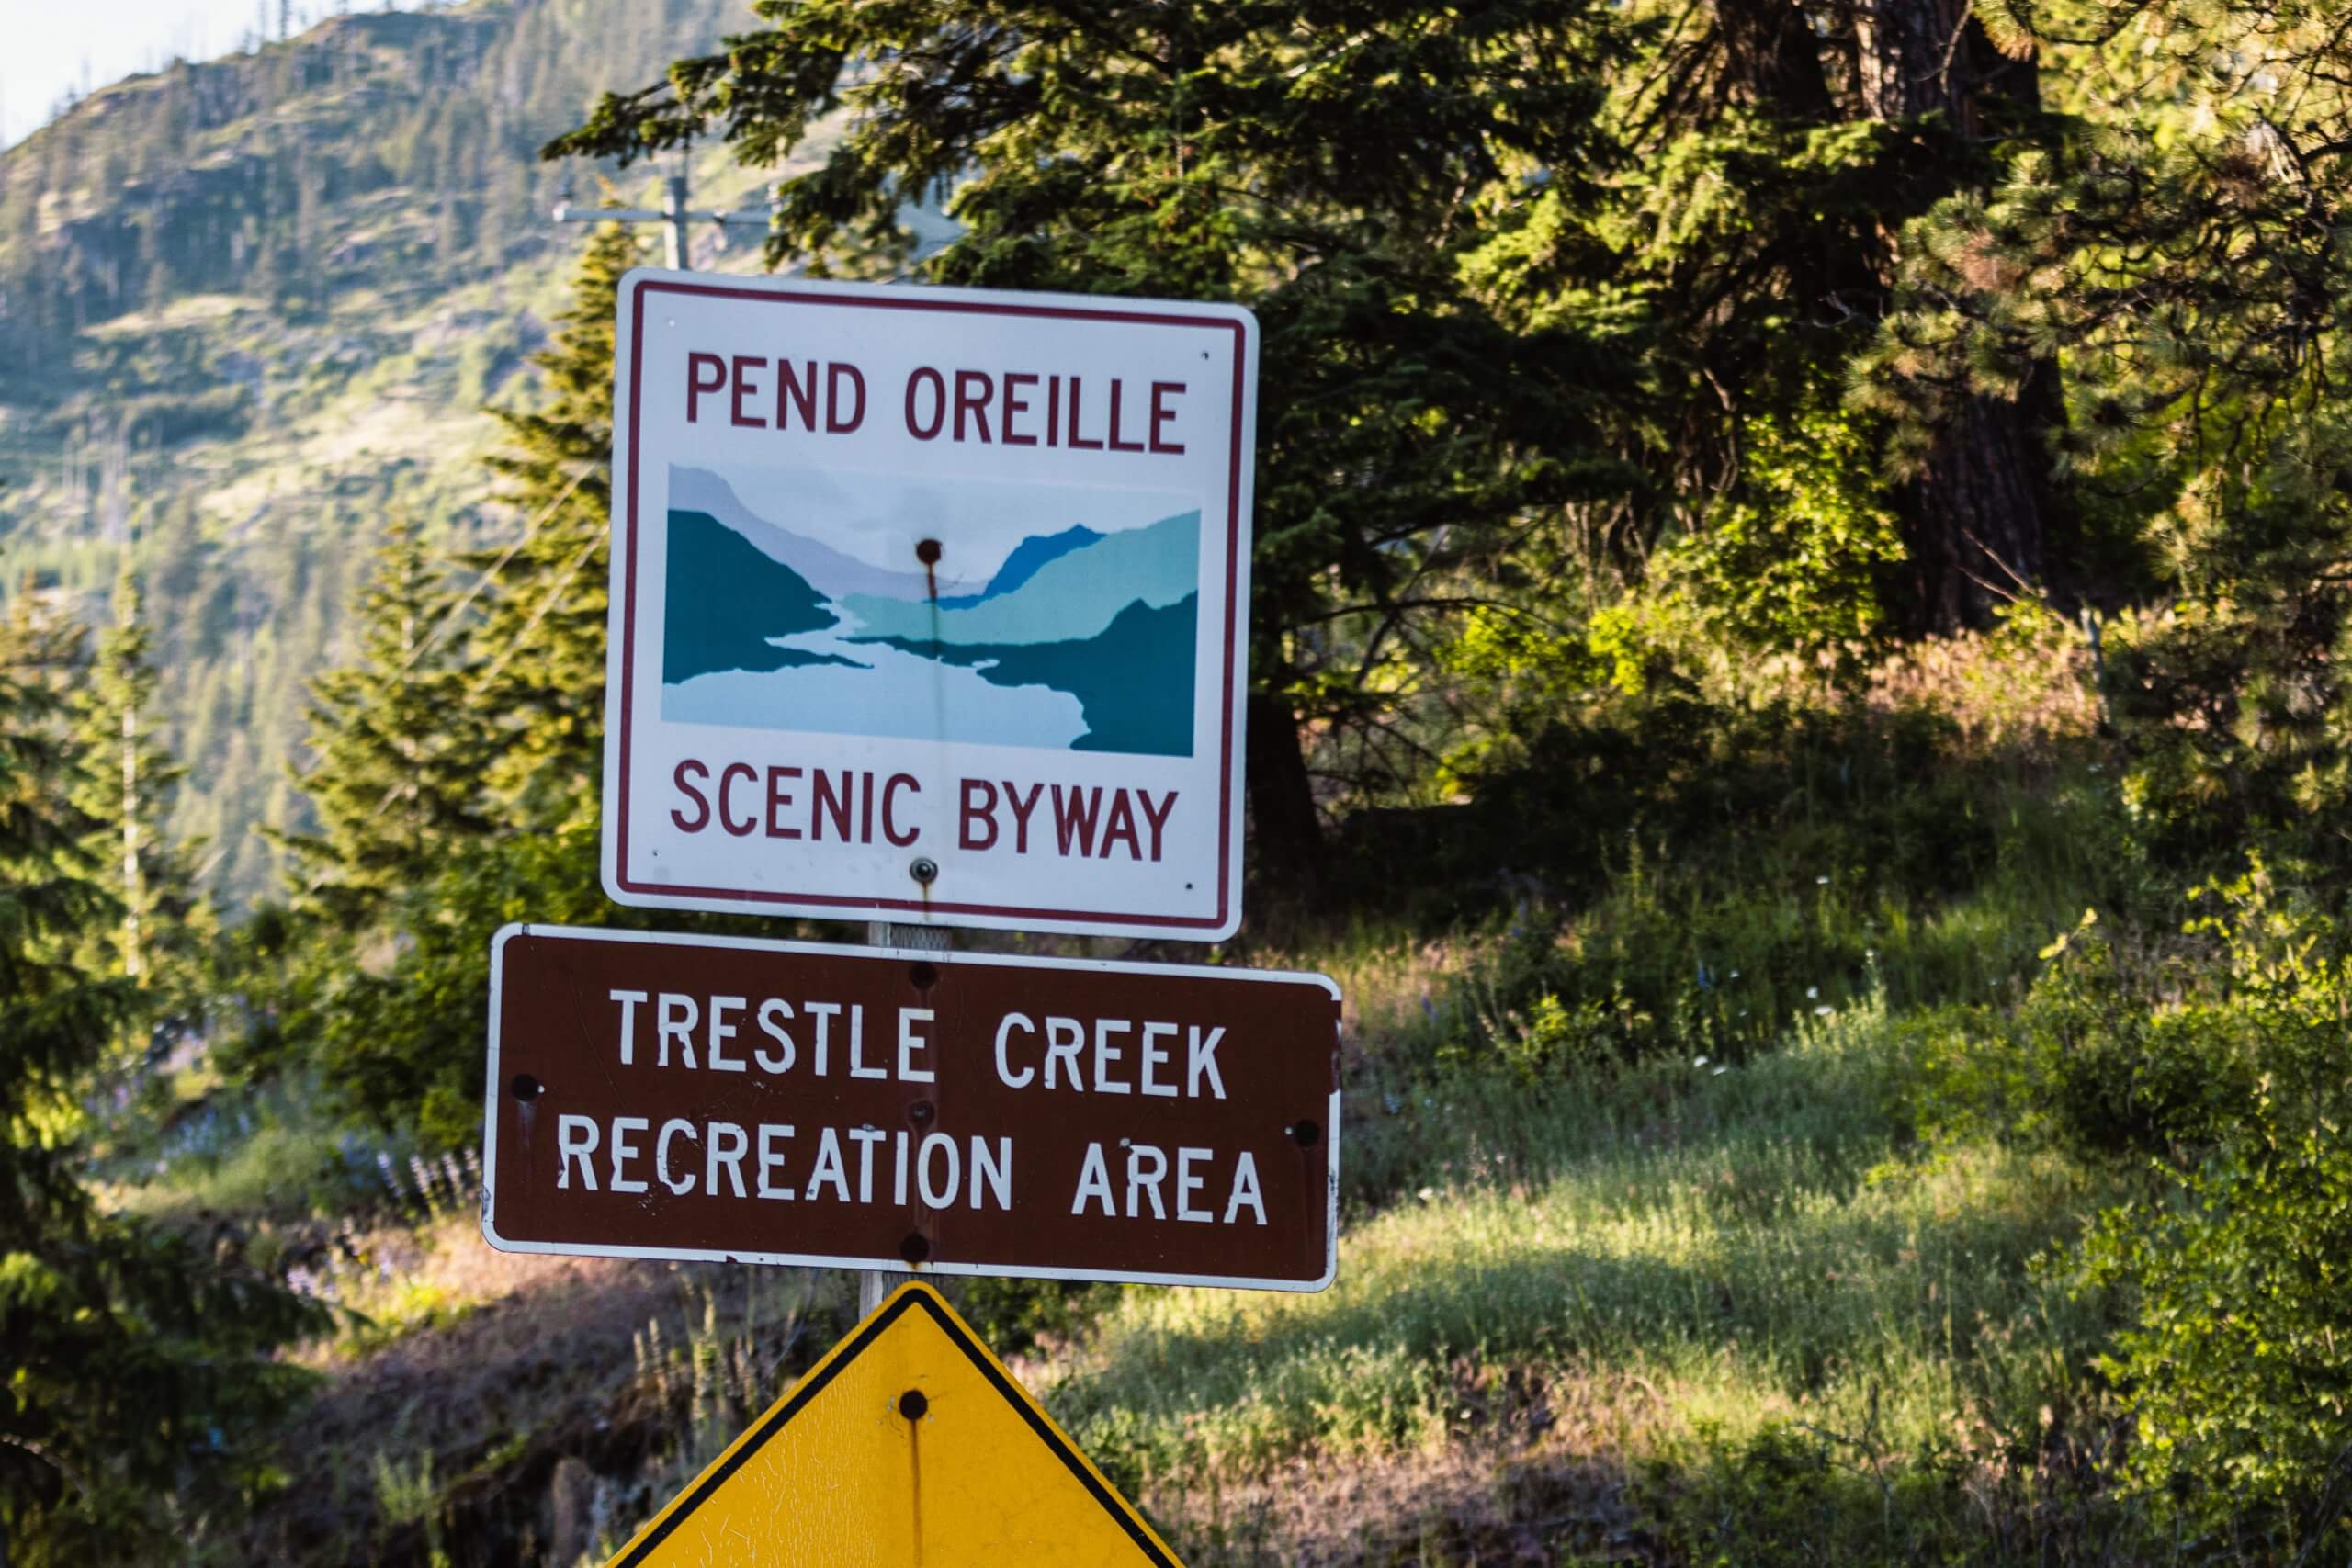 A roadside sign for Pend Oreille Scenic Byway and Trestle Creek Recreation Area.